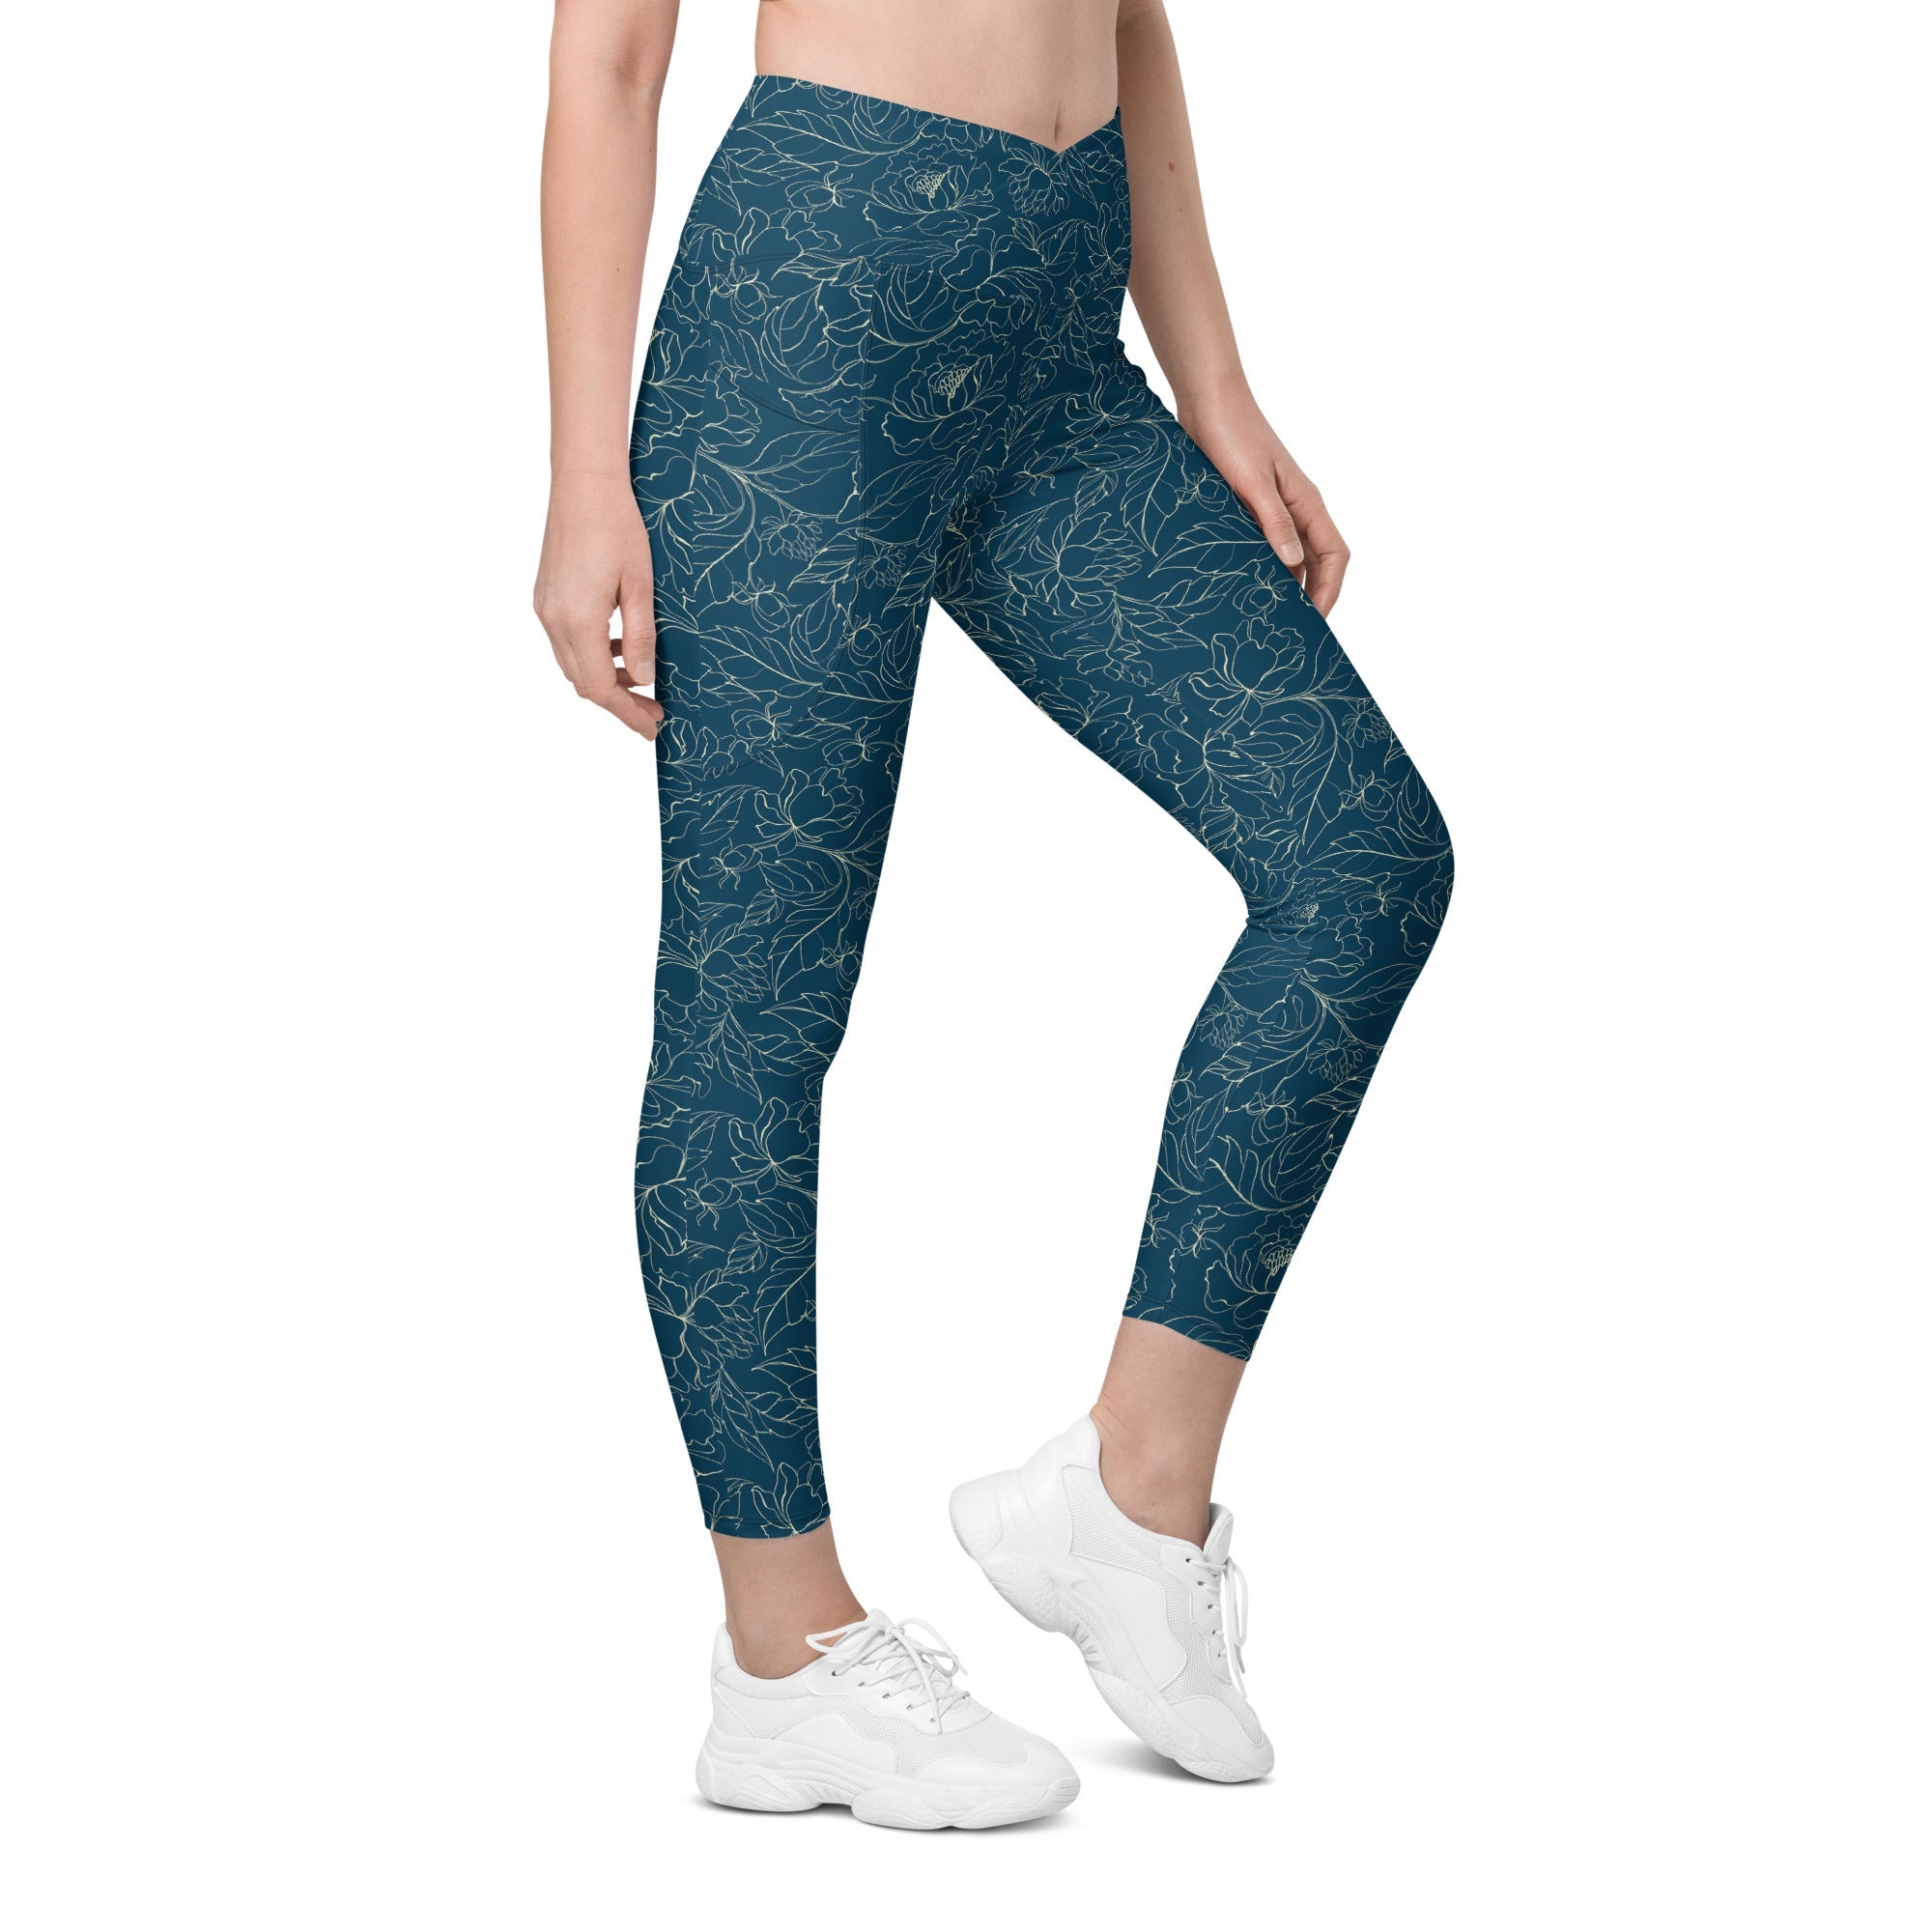 The best yoga leggings for Yin Yoga - Discover them Here! – Relax